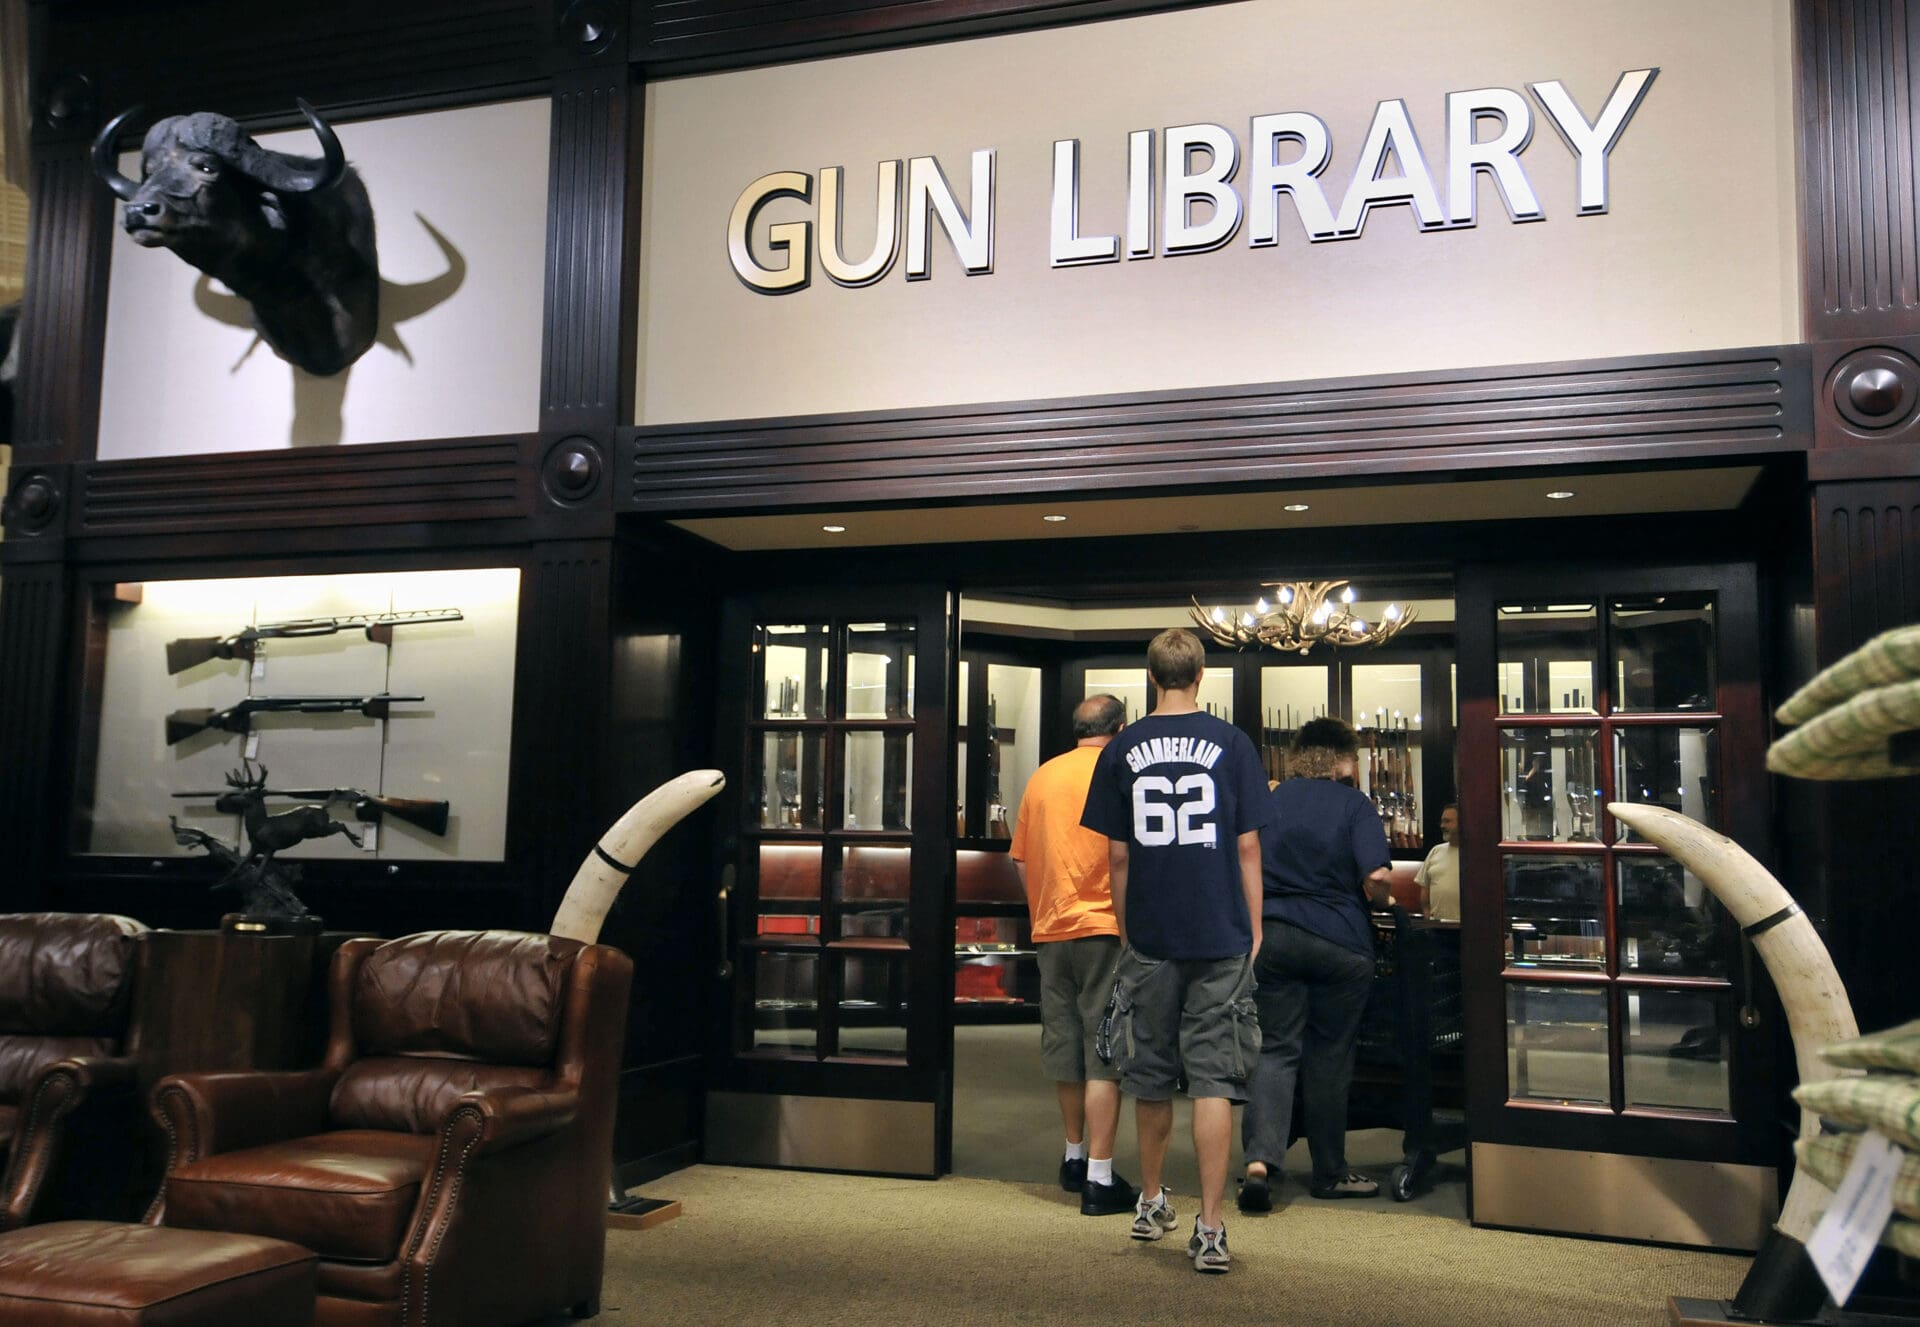 Cabela's gun library used rifle